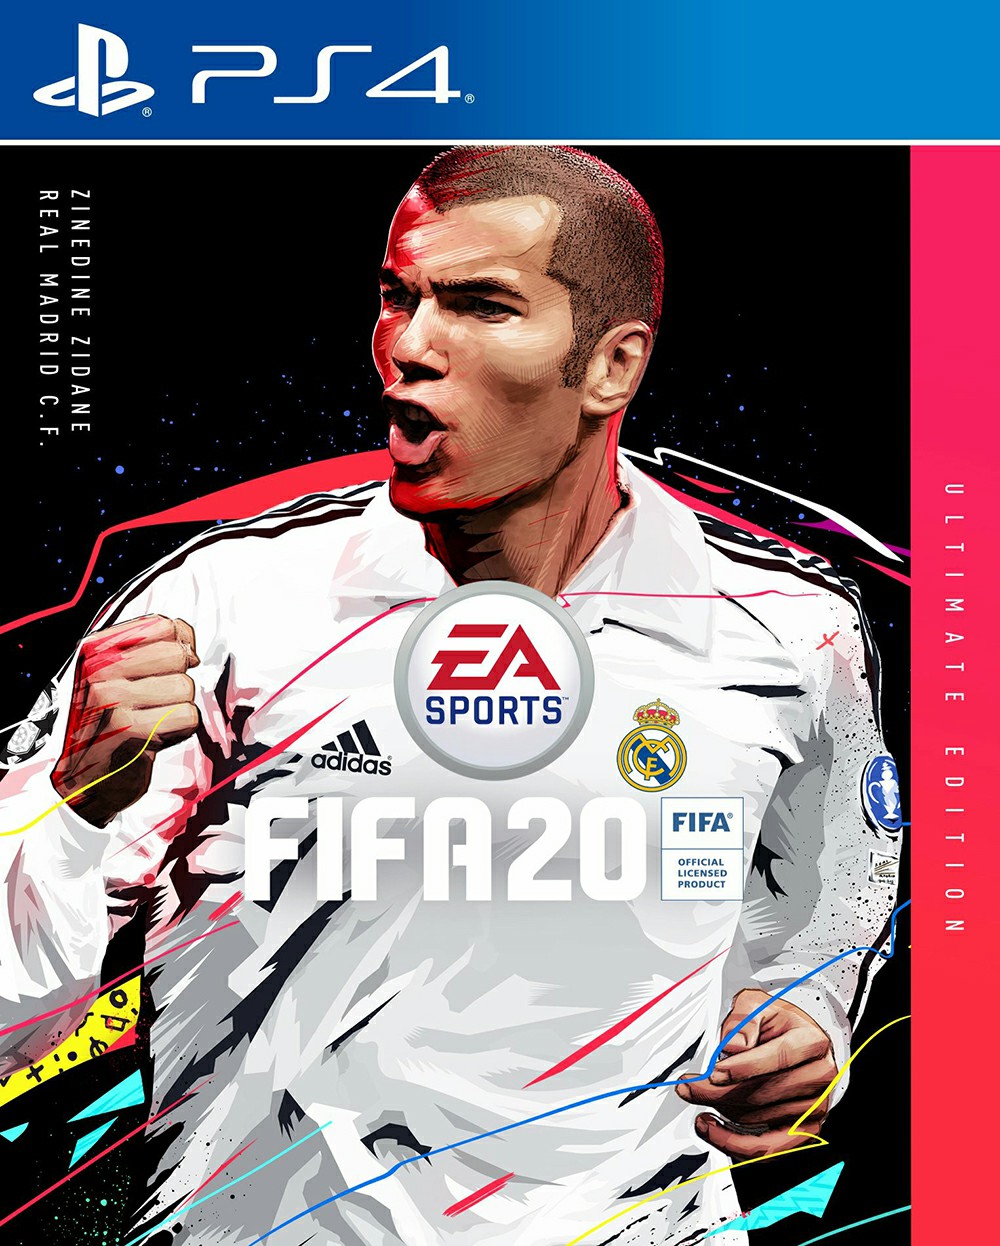 FIFA 20 Ultimate Edition Cover Star is Zinédine Zidane